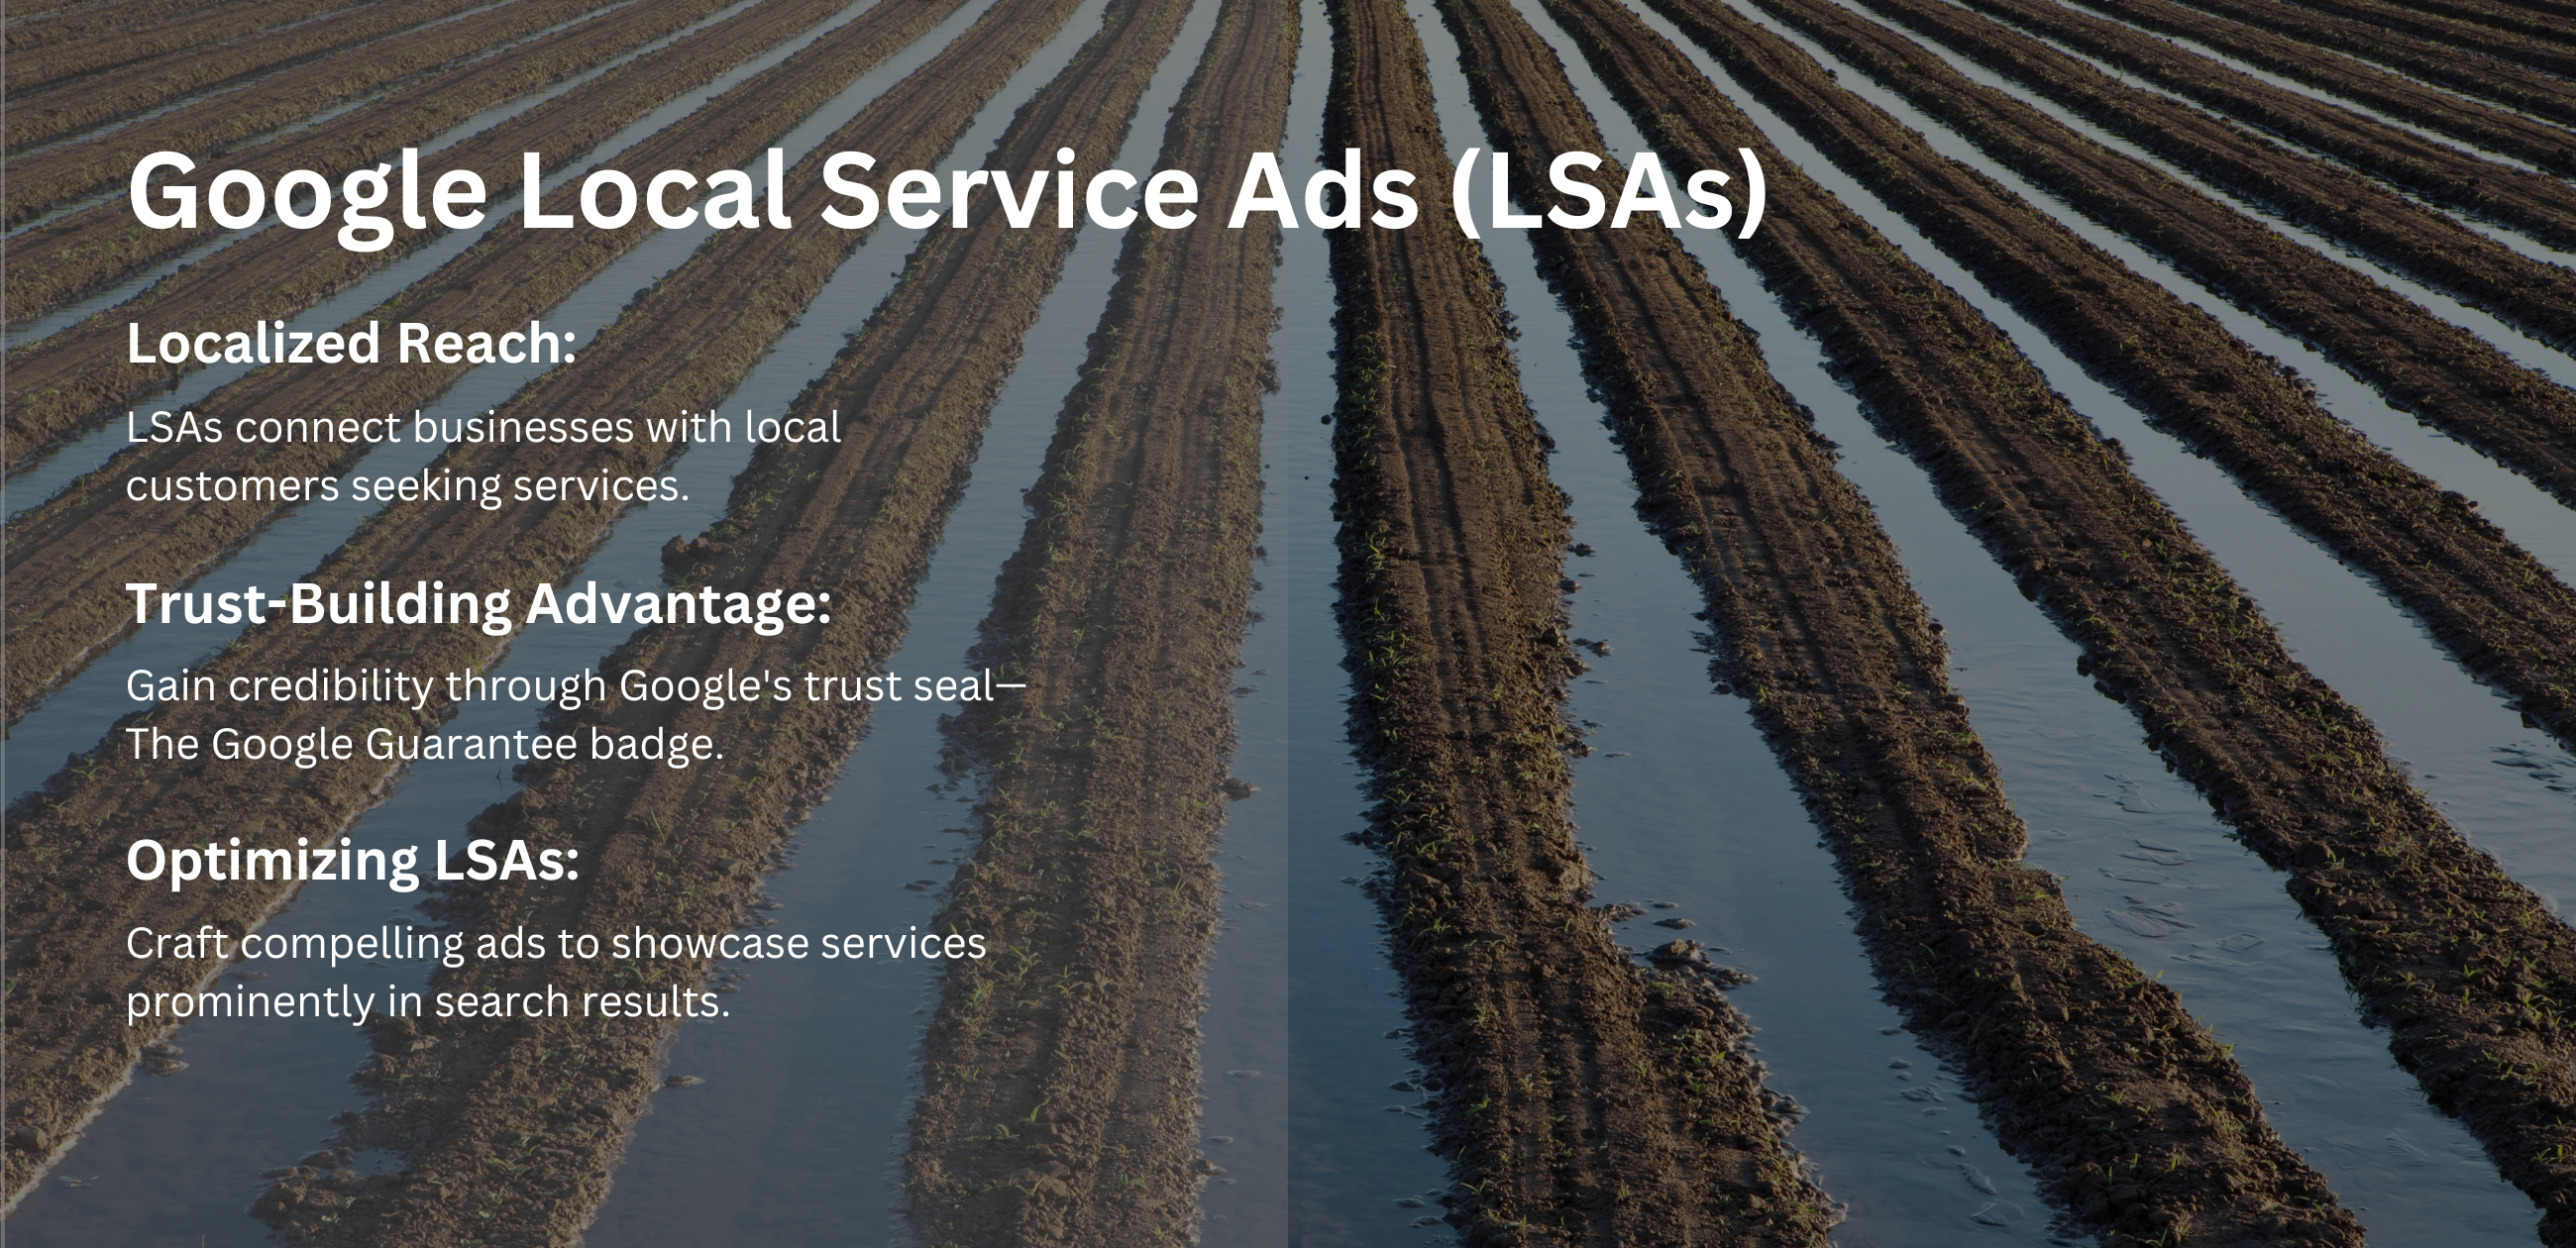 Mastering Google Local Service Ads for Irrigation Businesses